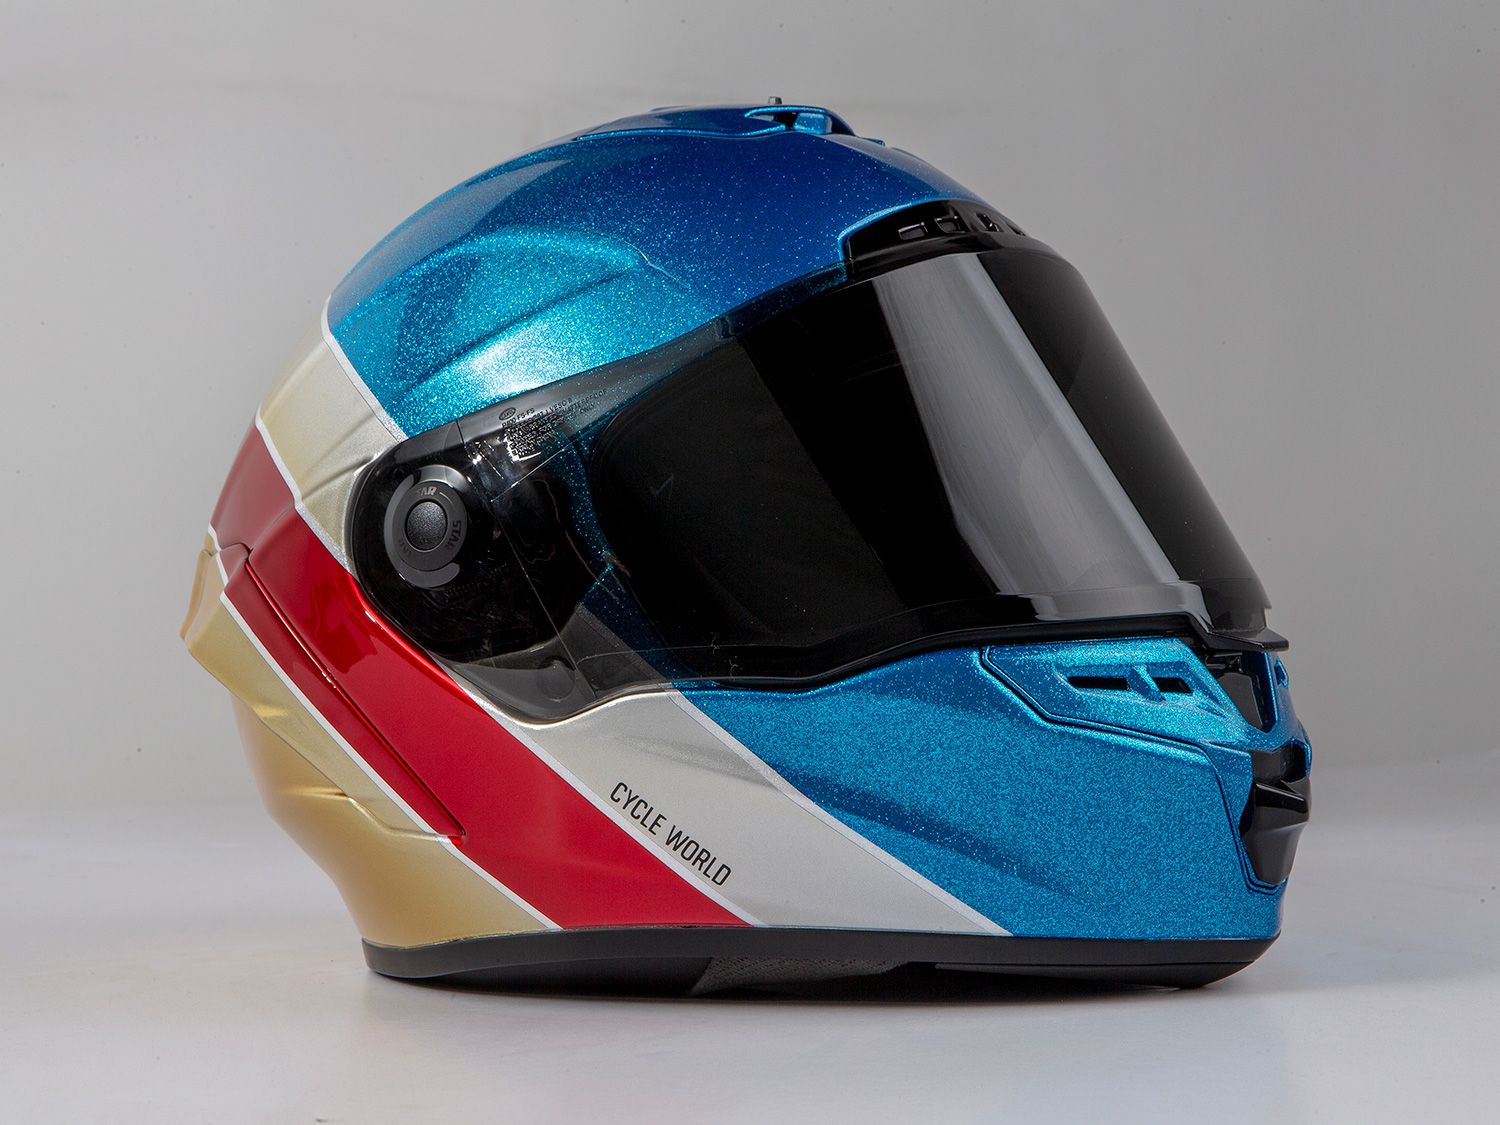 Custom Paint From Bell Helmets And Helmade Cycle World,Porsche Design Carbon Wallet